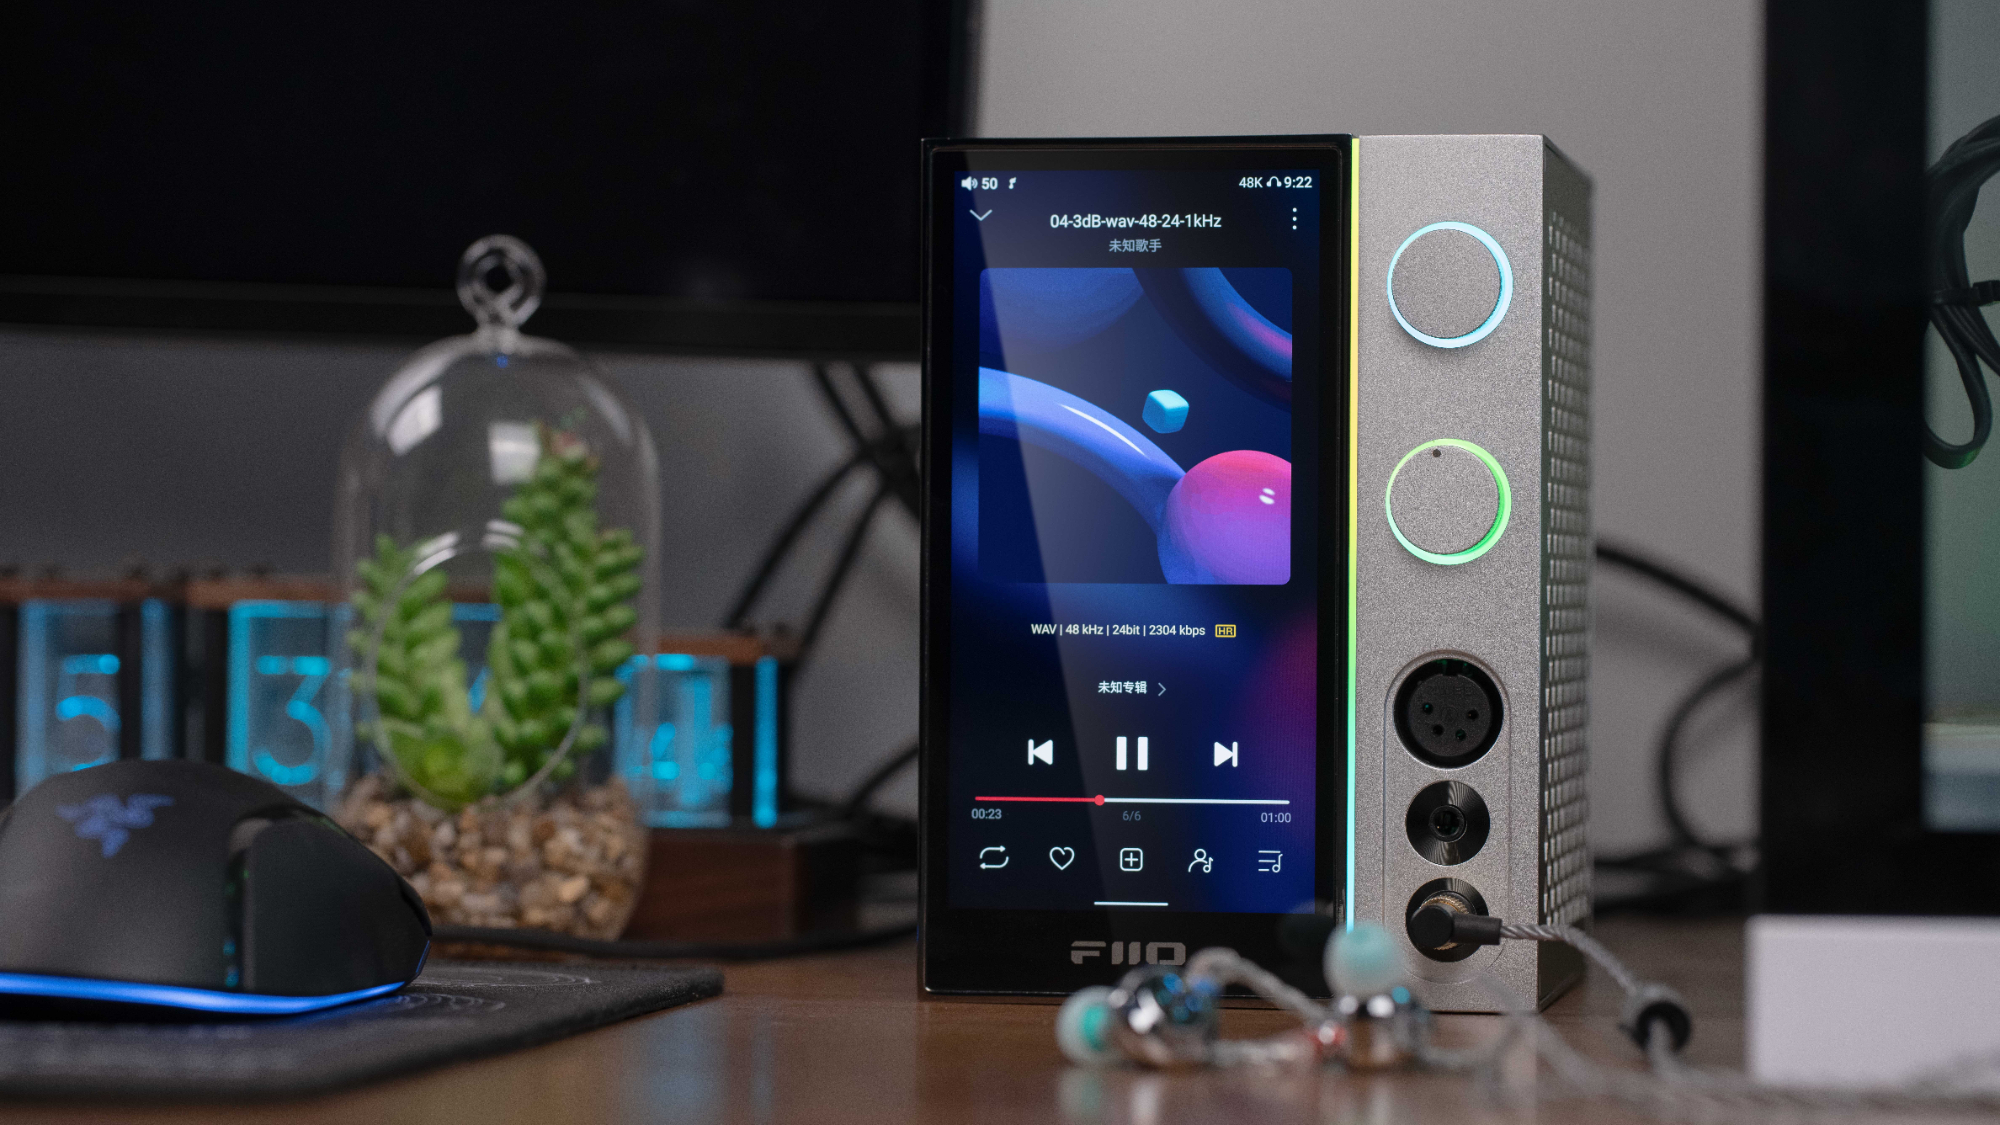 FiiO R7 Desktop Streaming Player: The Device That Does It All